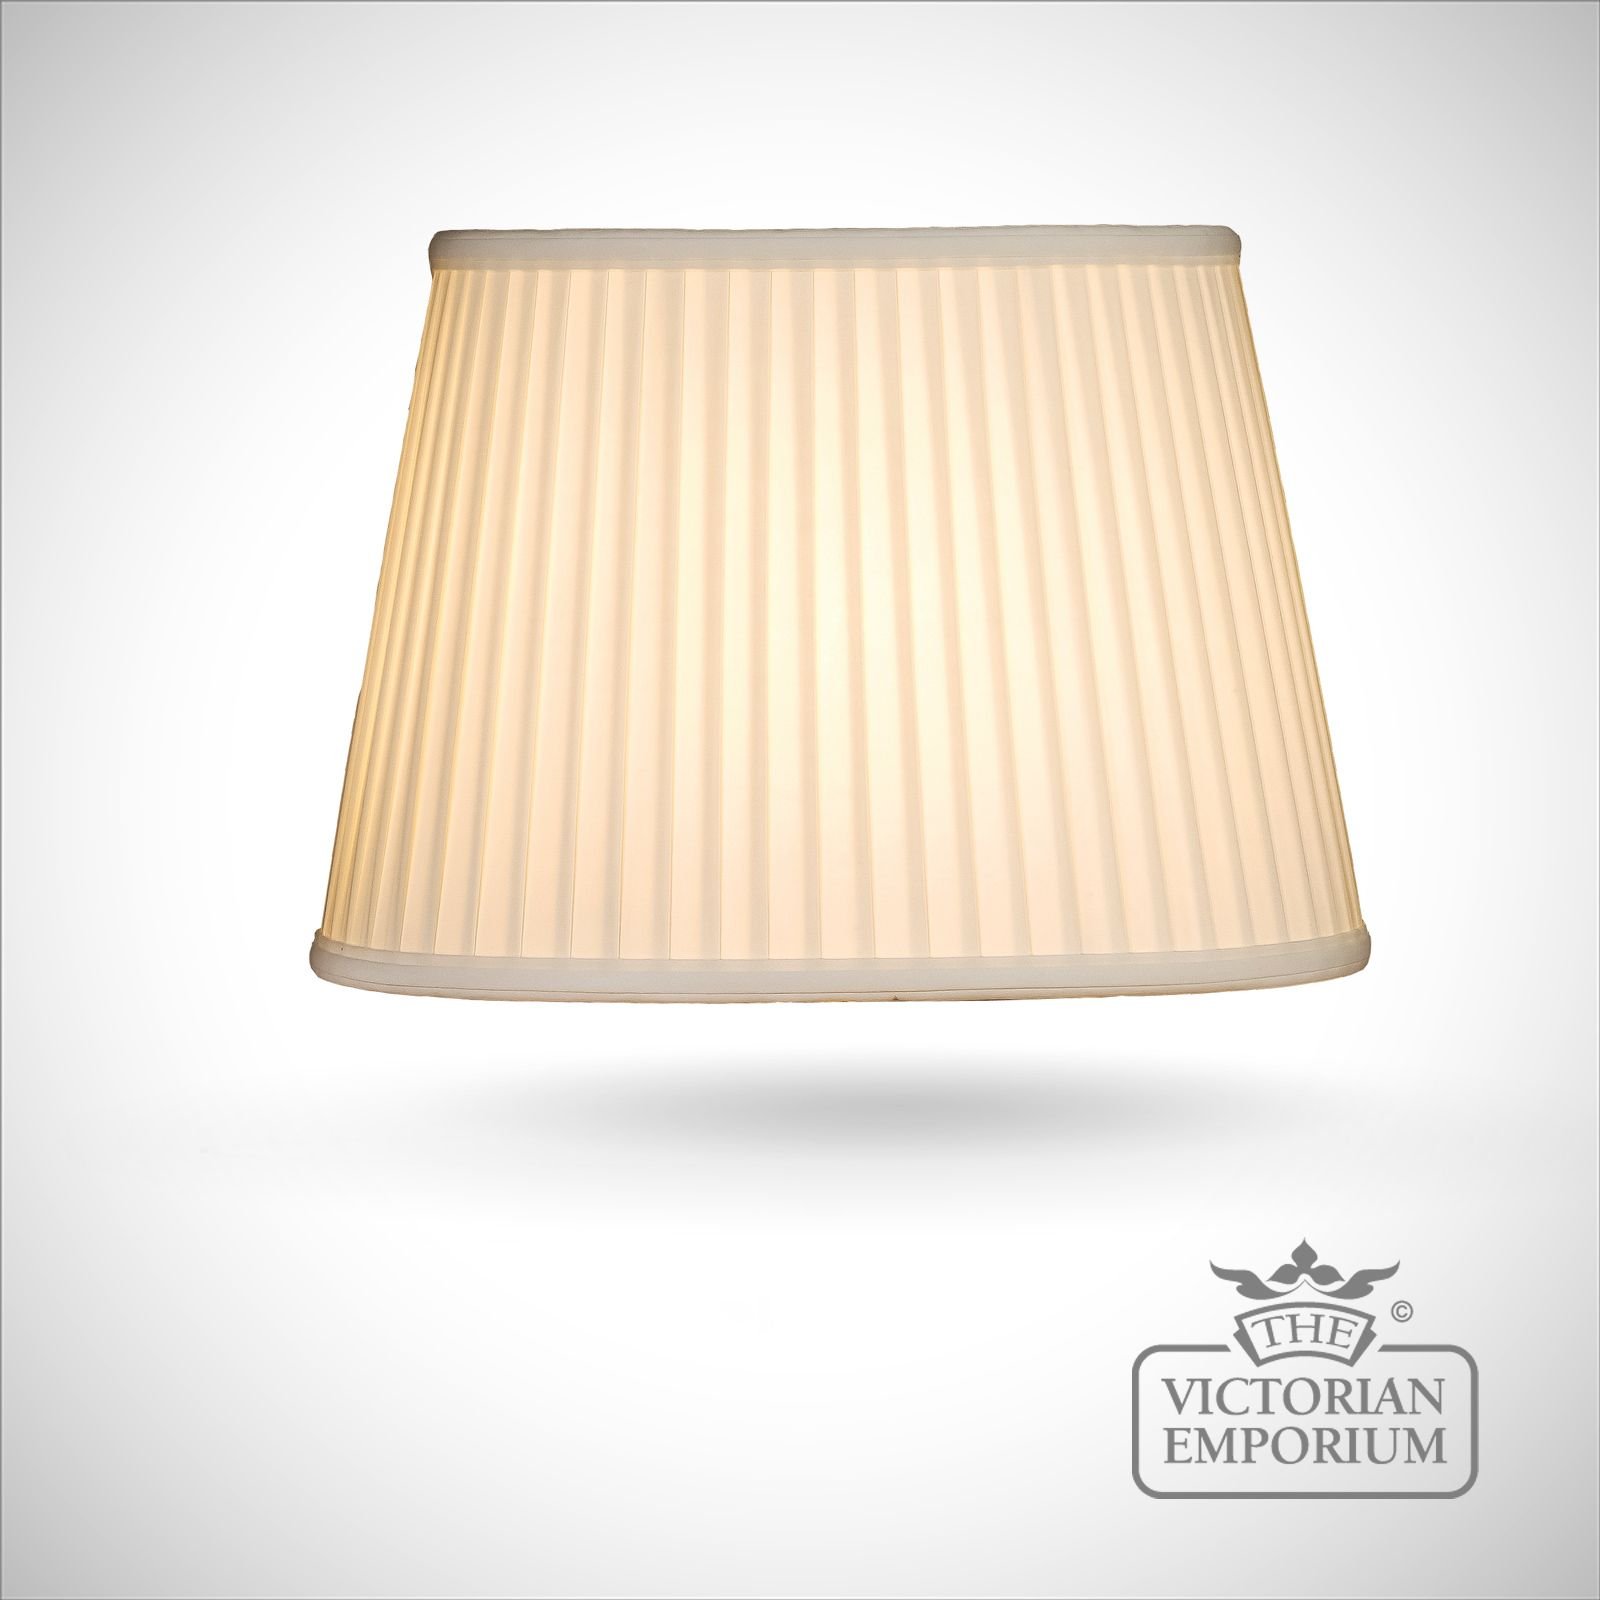 Cotton Fine Pleat Oval Lamp Shade in Ivory - 36cm